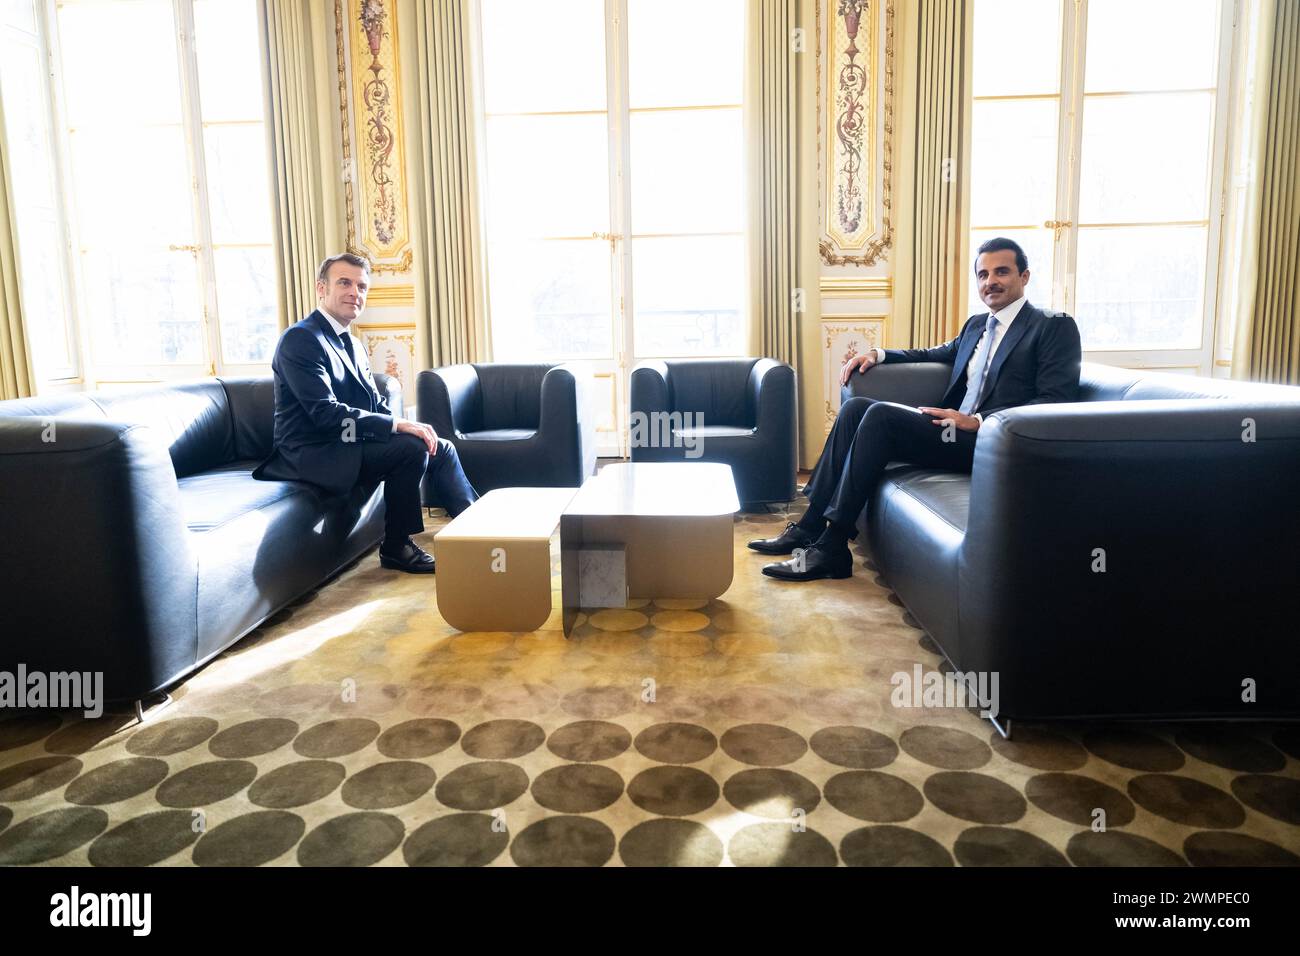 Paris, France. 27th Feb, 2024. French President Emmanuel Macron meets with Qatar's Emir Sheikh Tamim bin Hamad al-Thani at the Elysee Palace, in Paris, France on February 27, 2024. Macron and the Emir of Qatar take stock of current efforts to secure a ceasefire and the release of hostages in Gaza, as well as ways of speeding up the implementation of a Palestinian state in order to bring a lasting end to the conflict. Photo by Eric Tschaen/Pool/ABACAPRESS.COM Credit: Abaca Press/Alamy Live News Stock Photo